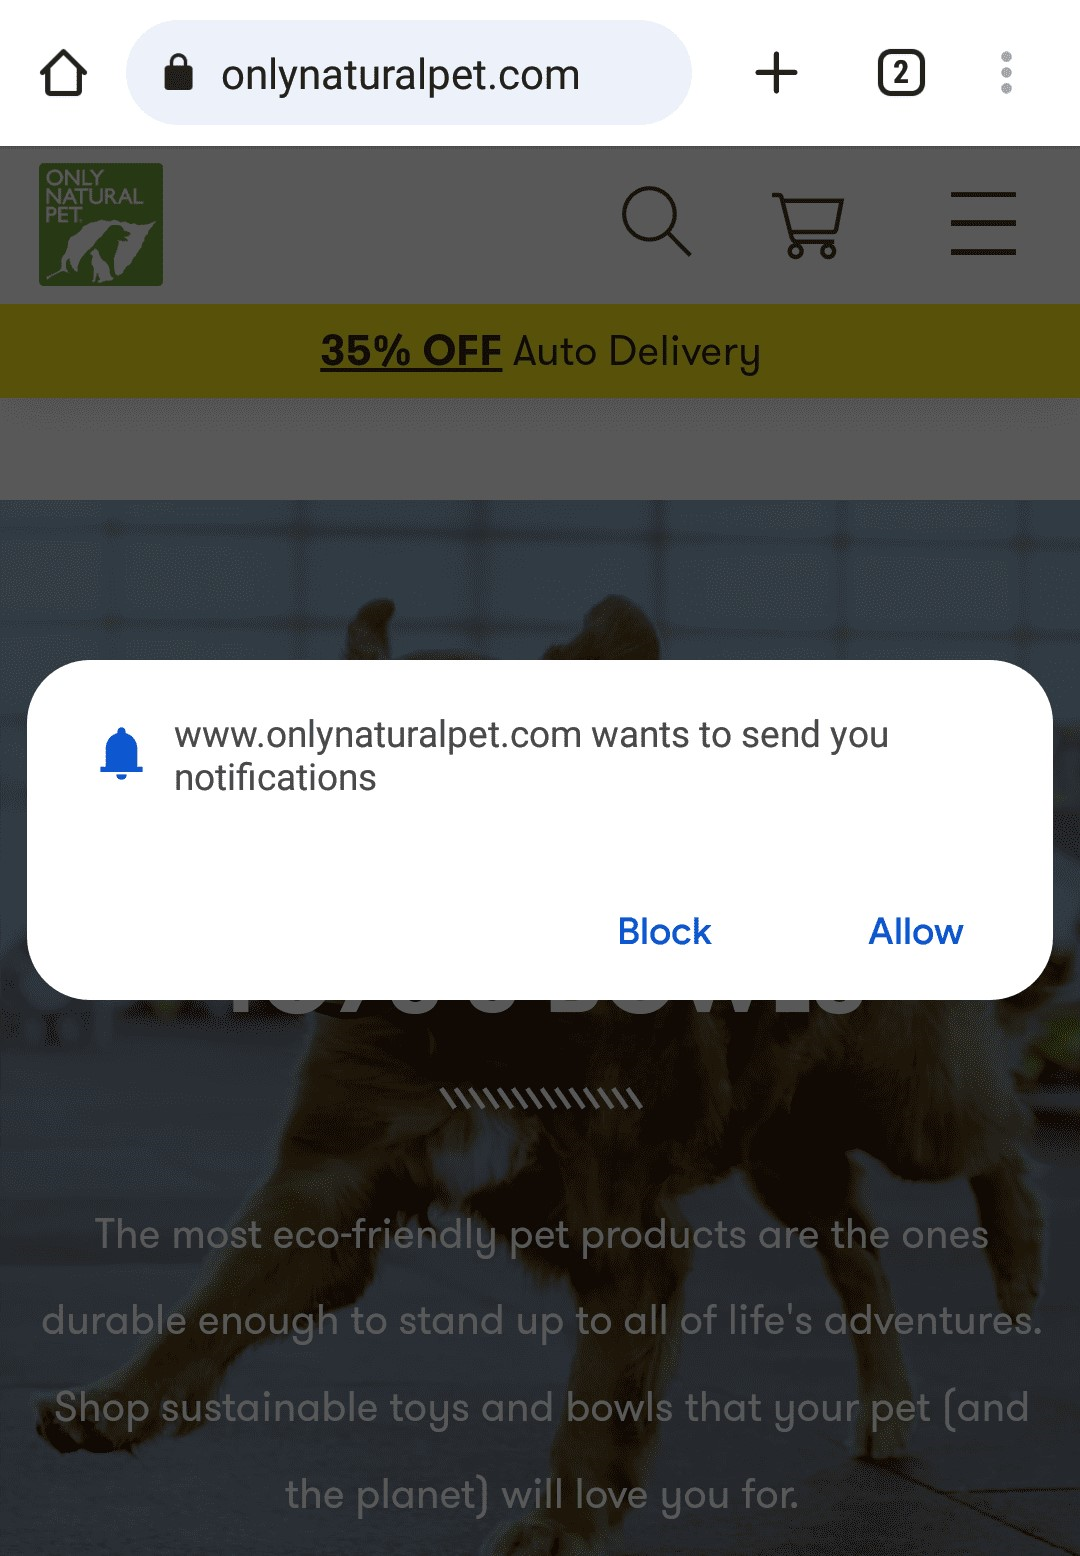 Only Natural Pet's website pop-up asking users if they privation  to person   the business’s notifications